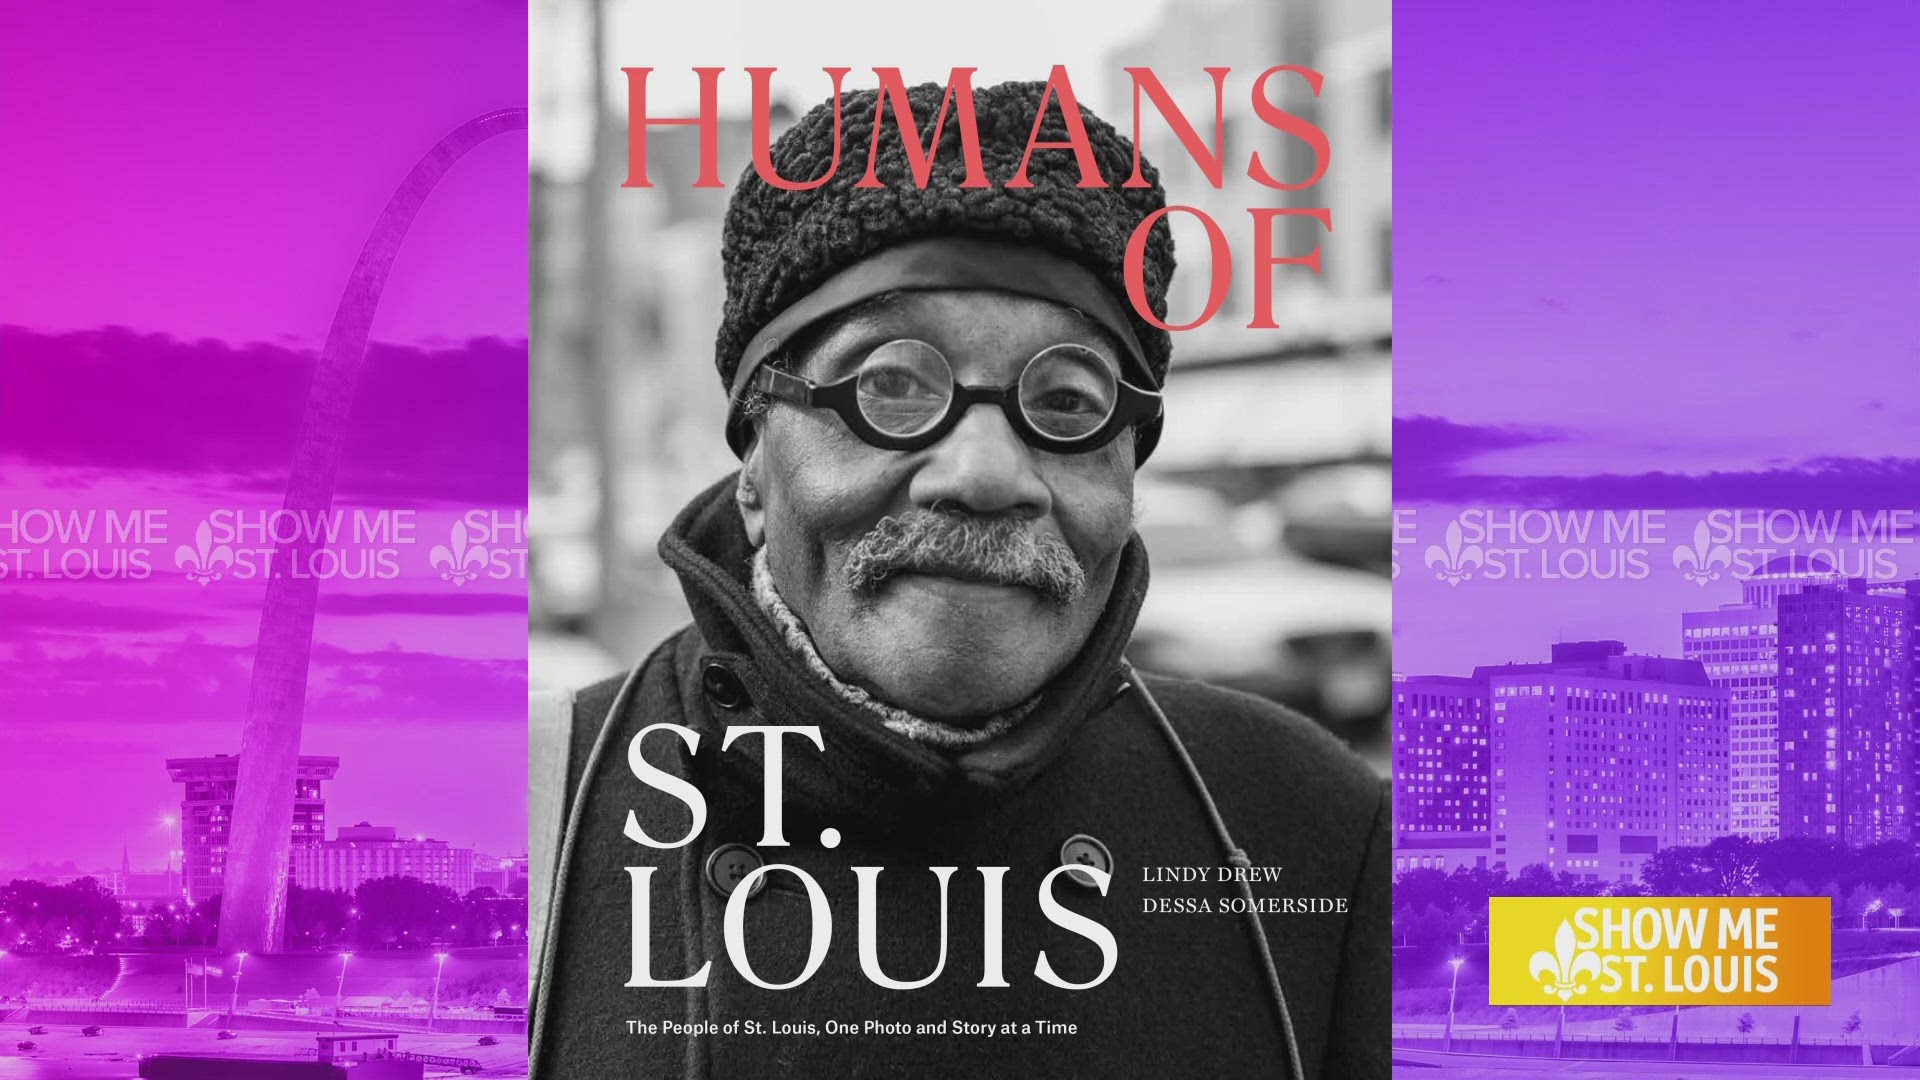 Thanks to the Regional Arts Commission, Humans of St. Louis is now available in bookstores and on their website: the perfect holiday gift!